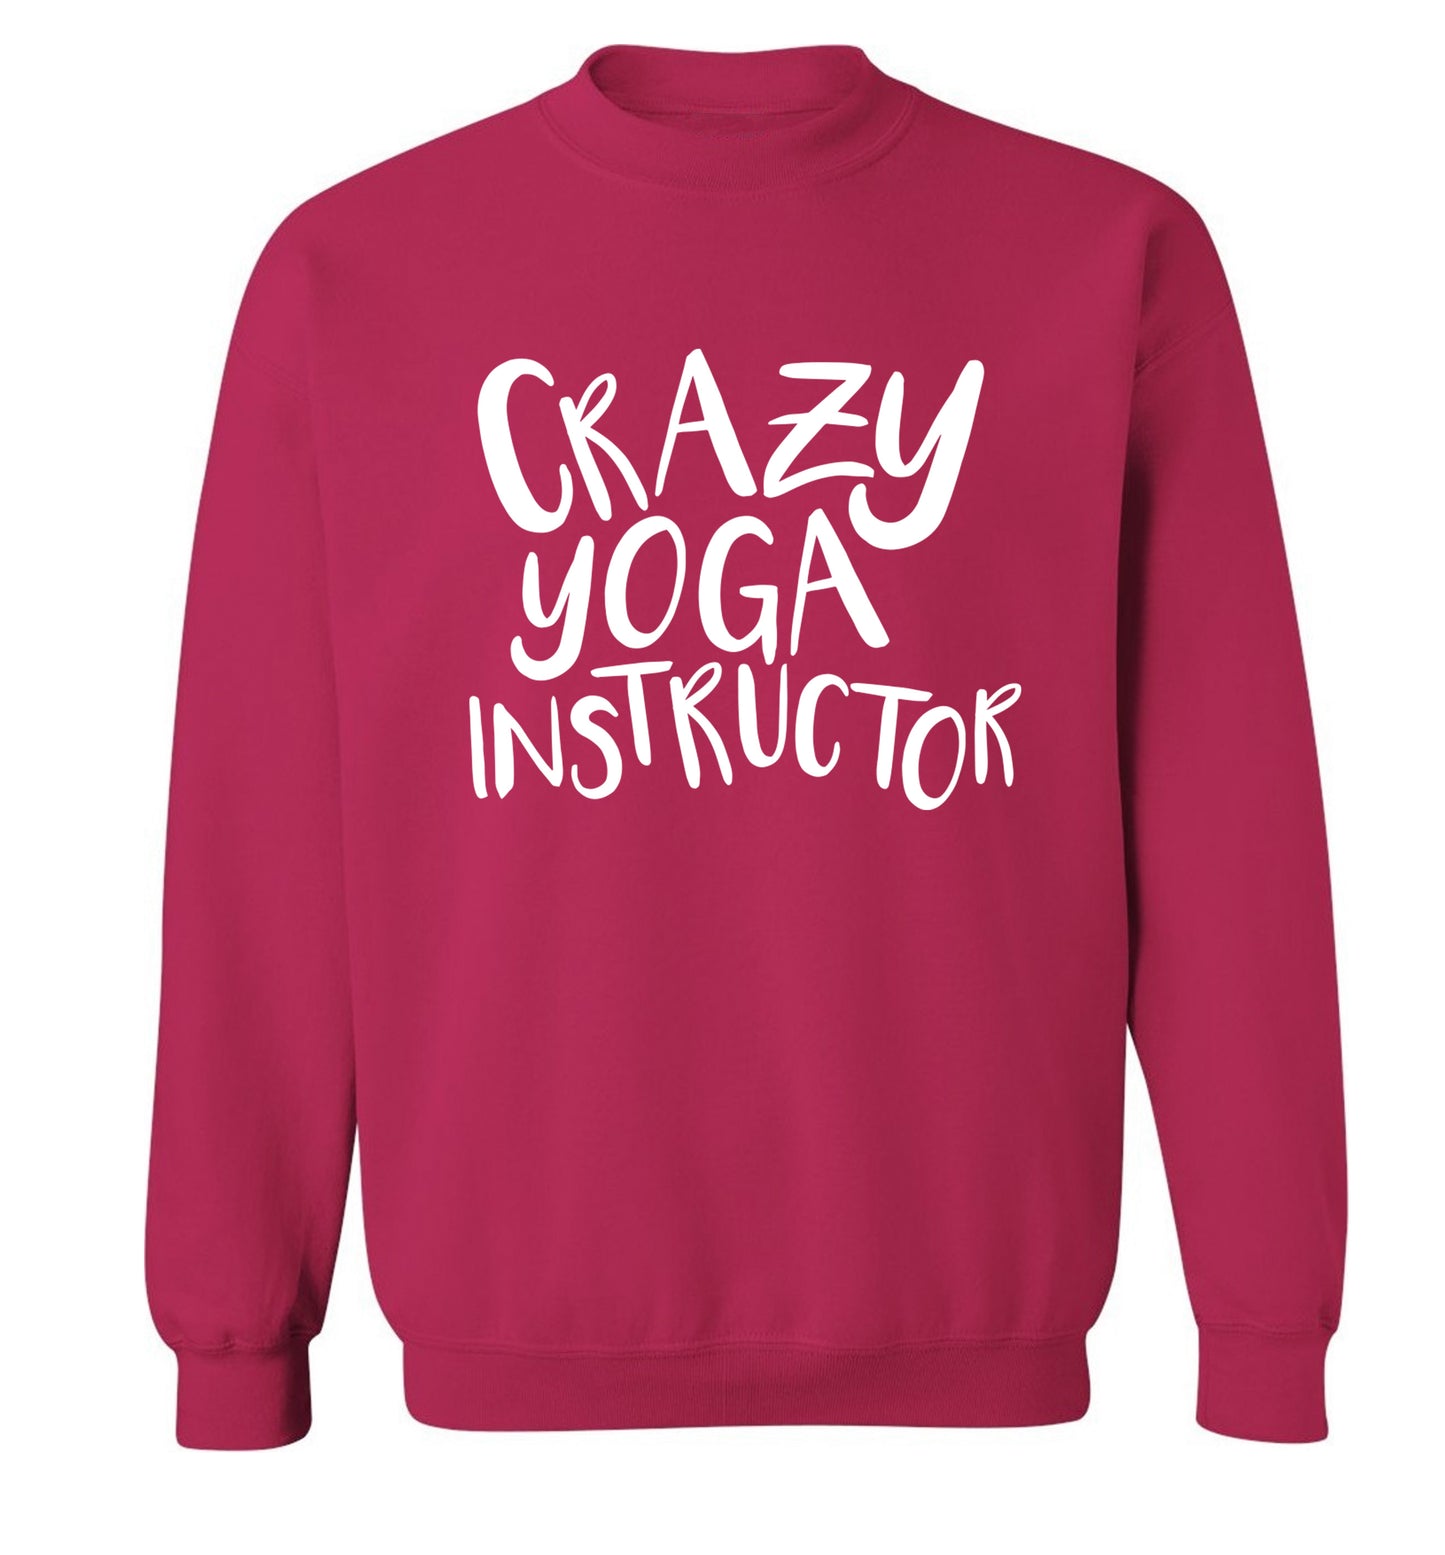 Crazy yoga instructor Adult's unisex pink Sweater 2XL